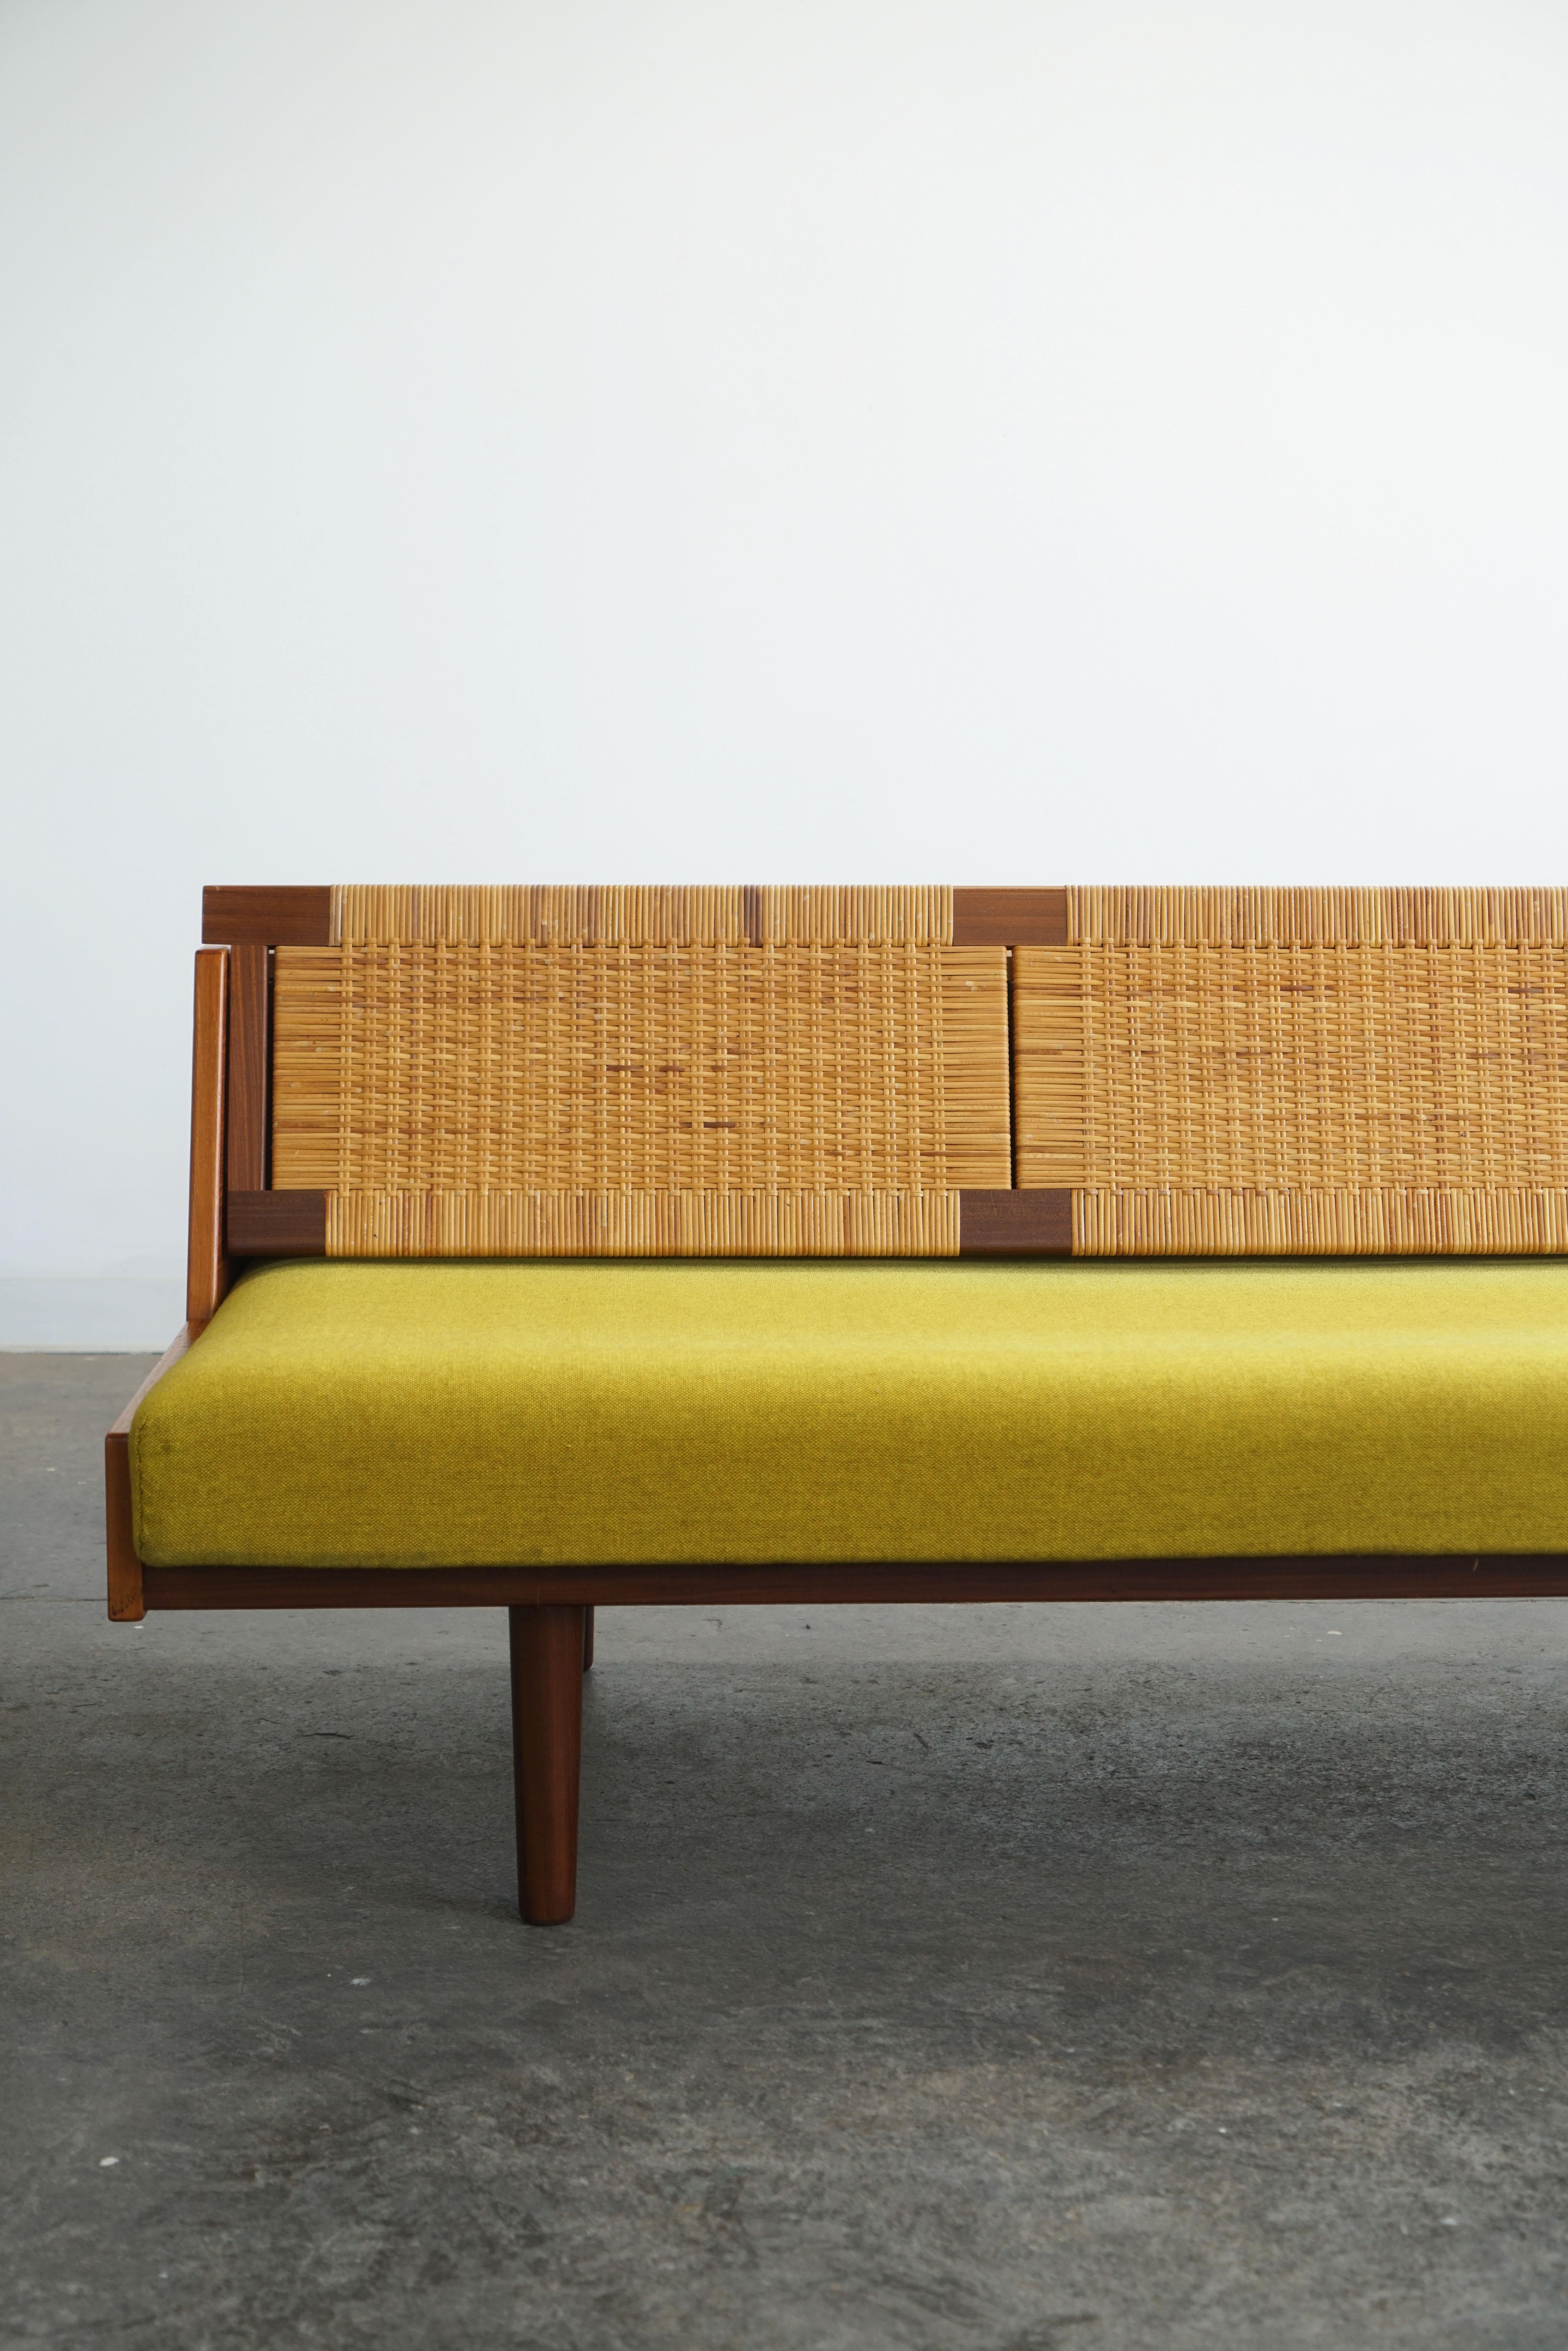 Mid-20th Century Hans Wegner Sofa Daybed Model GE7 in Teak and Cane 1960's for Getama For Sale